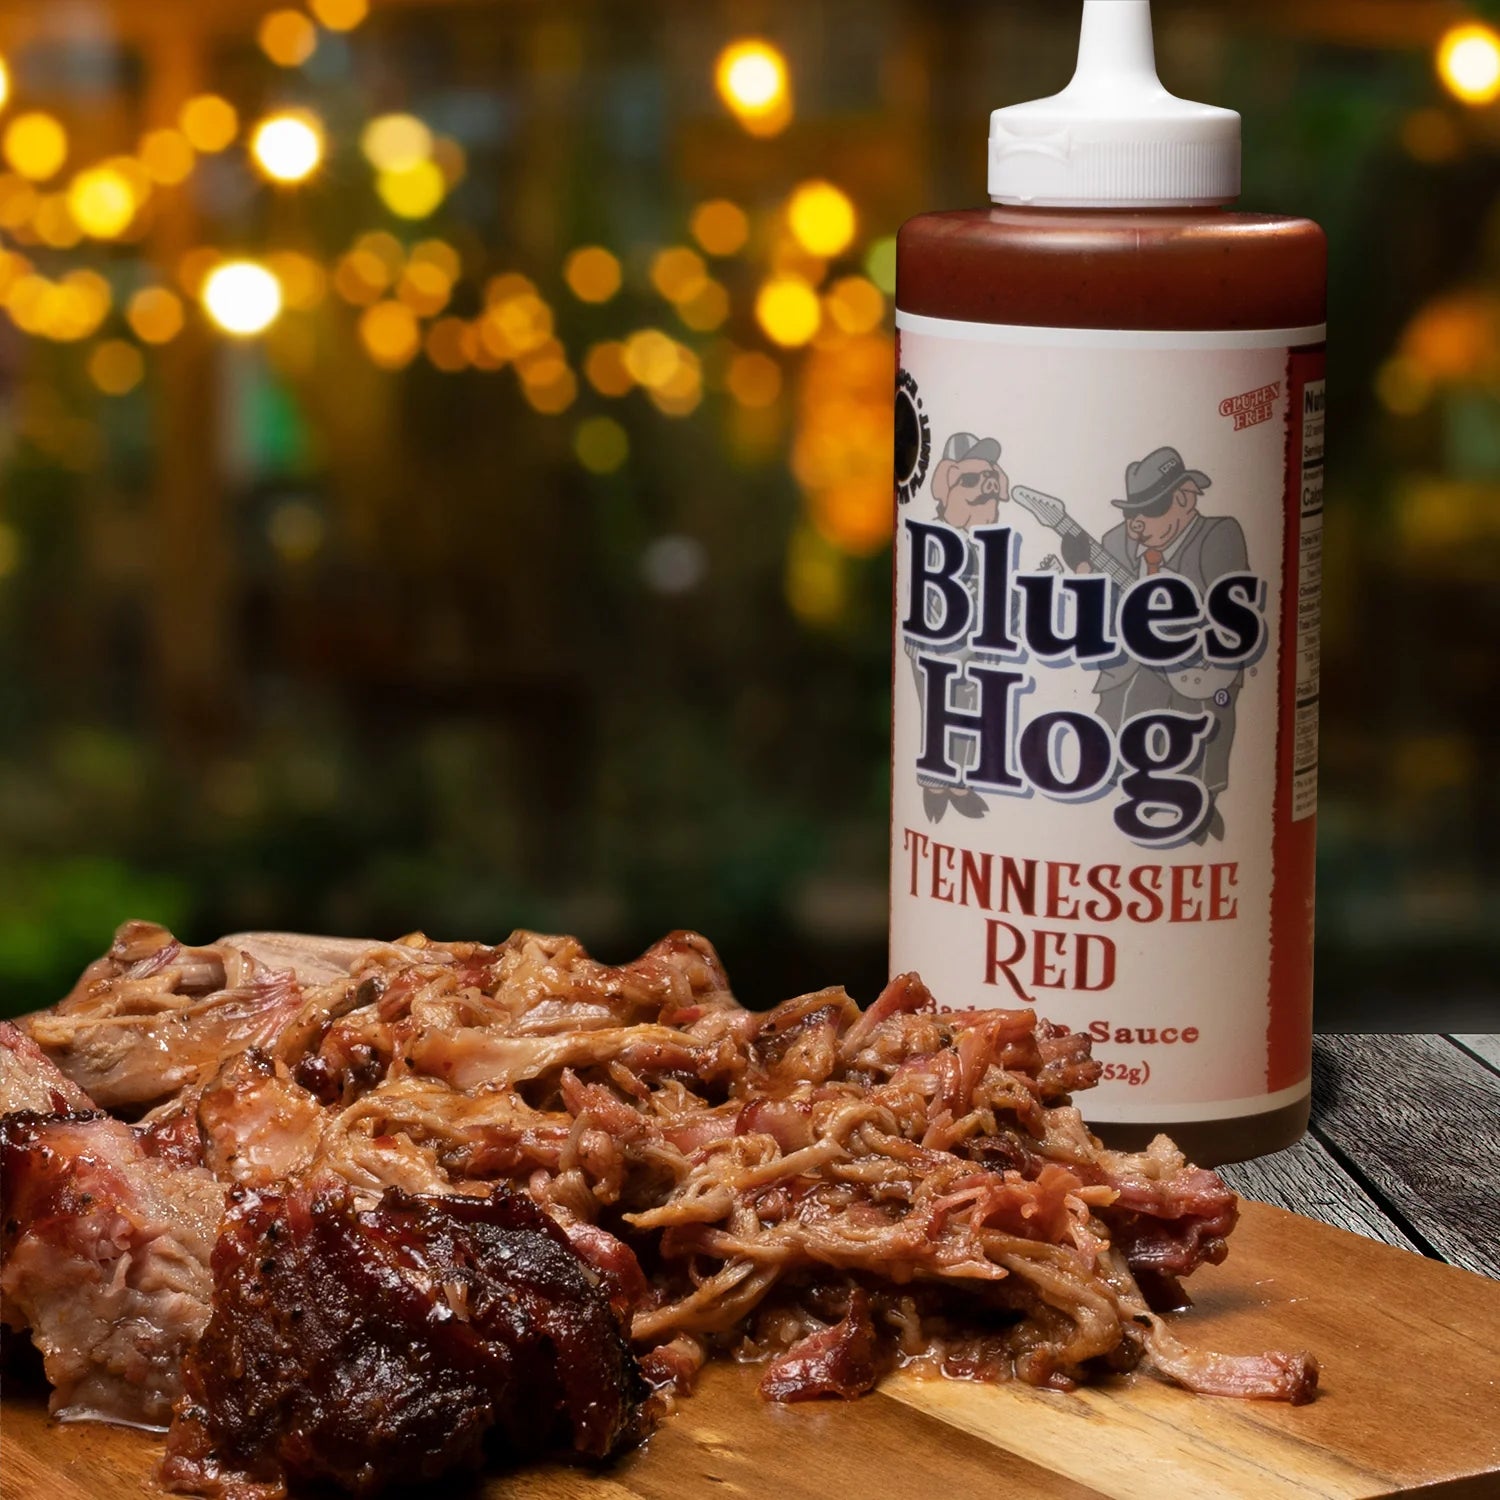 Blues Hog Tennessee Red BBQ Sauce Backyard with Juicy Steaks